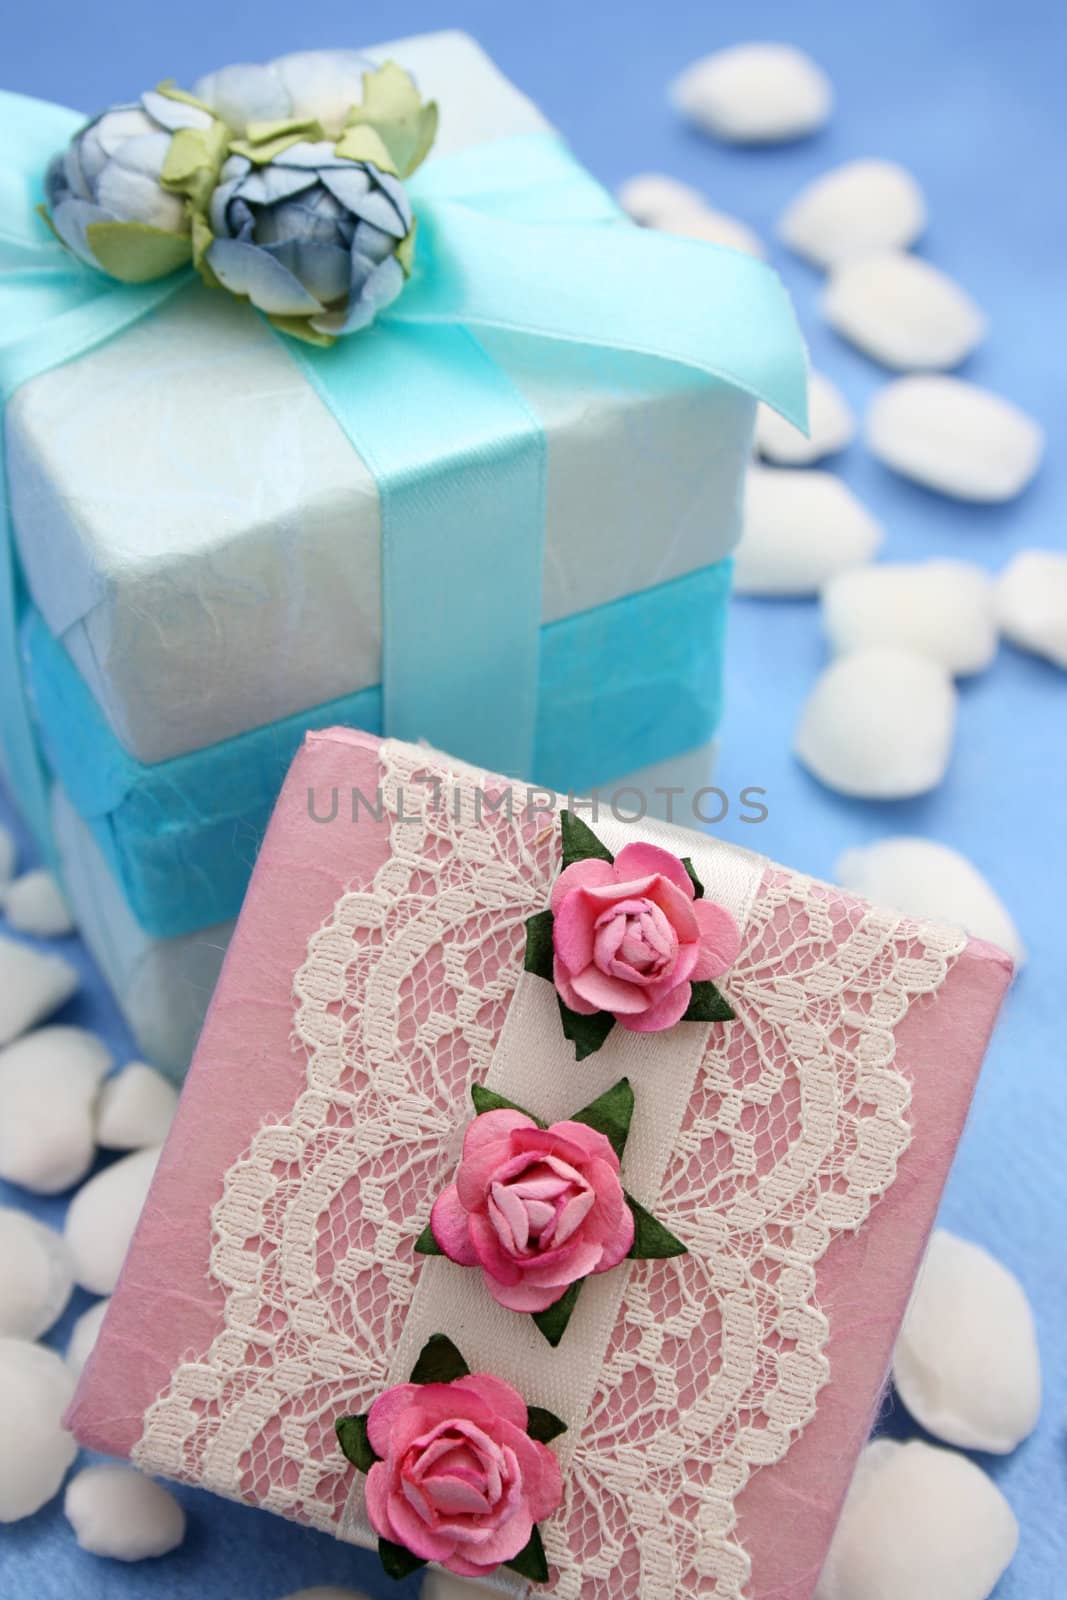 Soapy Gifts by vanell